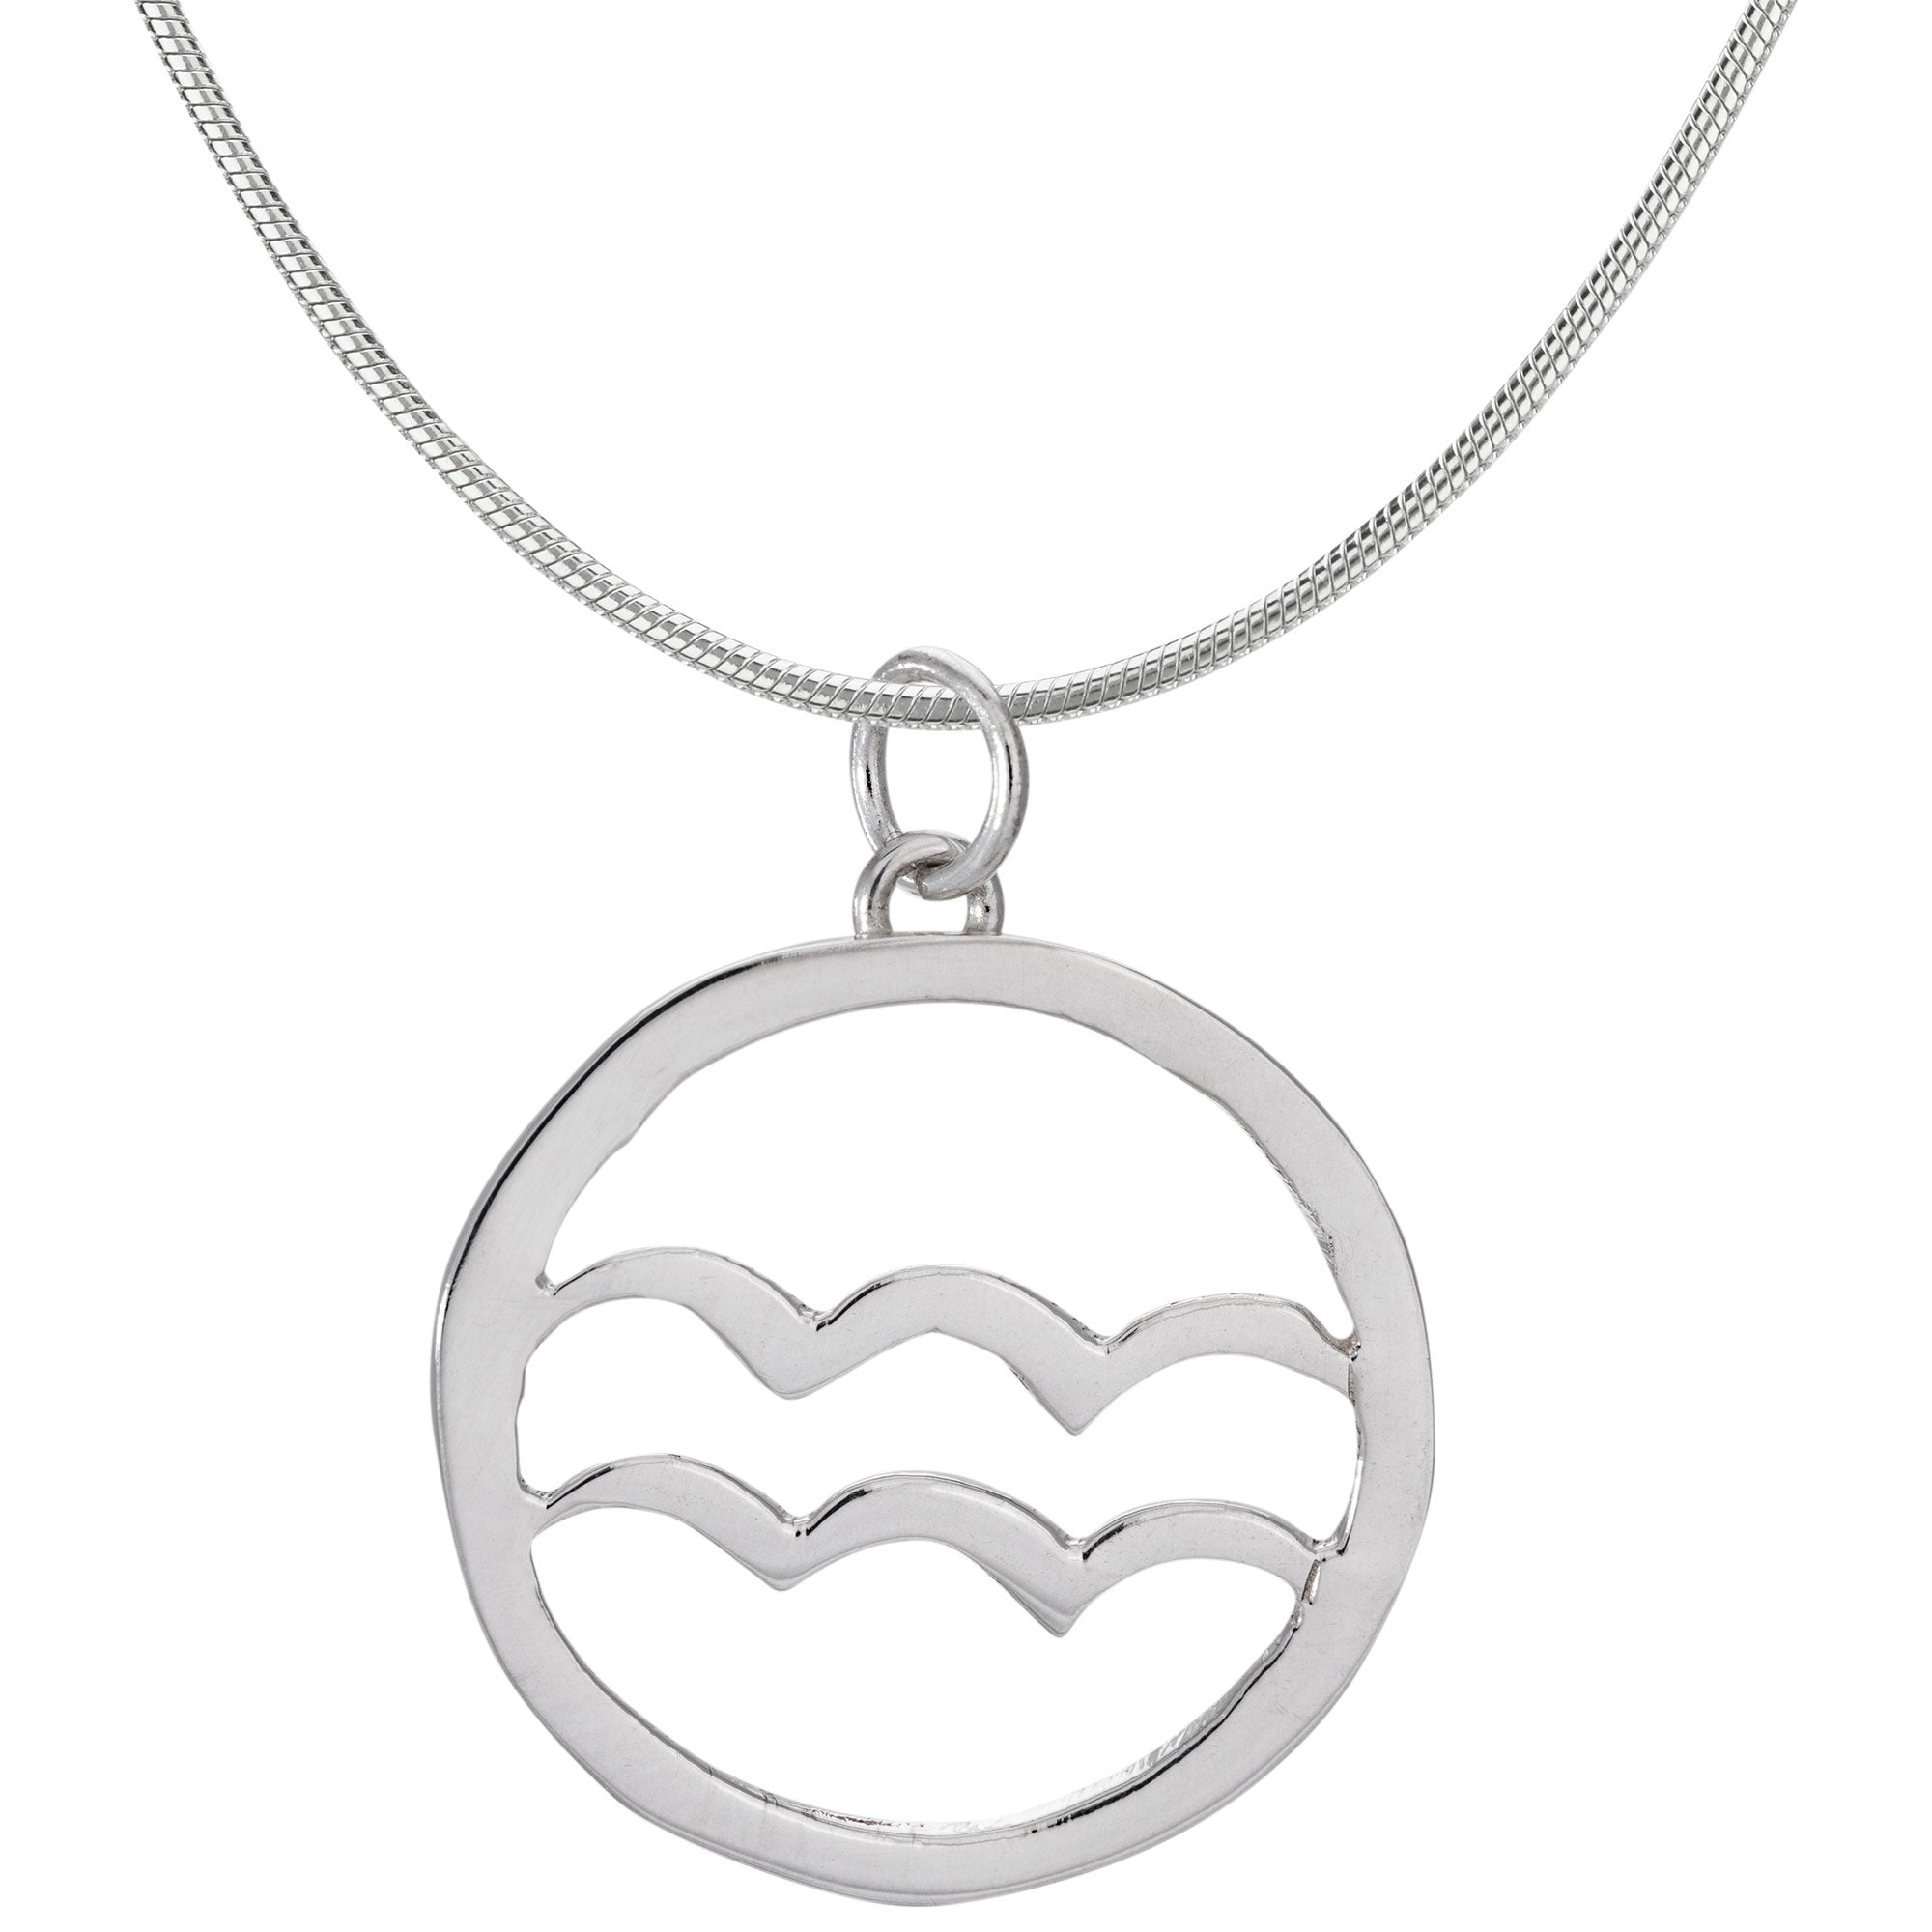 Zodiac Sign Astrology Necklace Collection - Aquarius - With Sterling Cable Chain